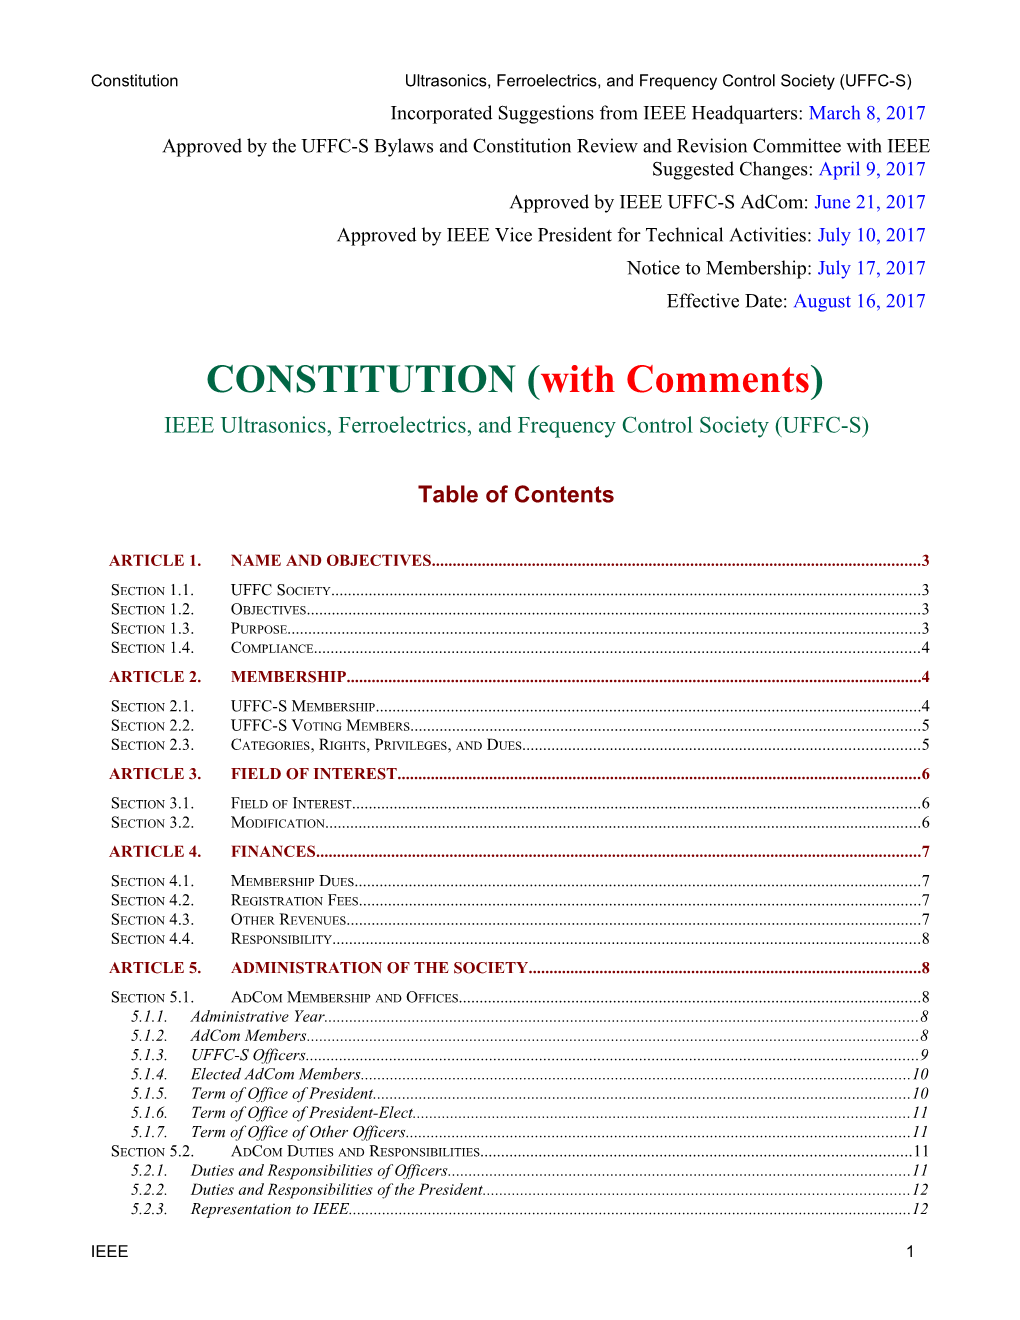 UFFC-S Constitution - with Comments